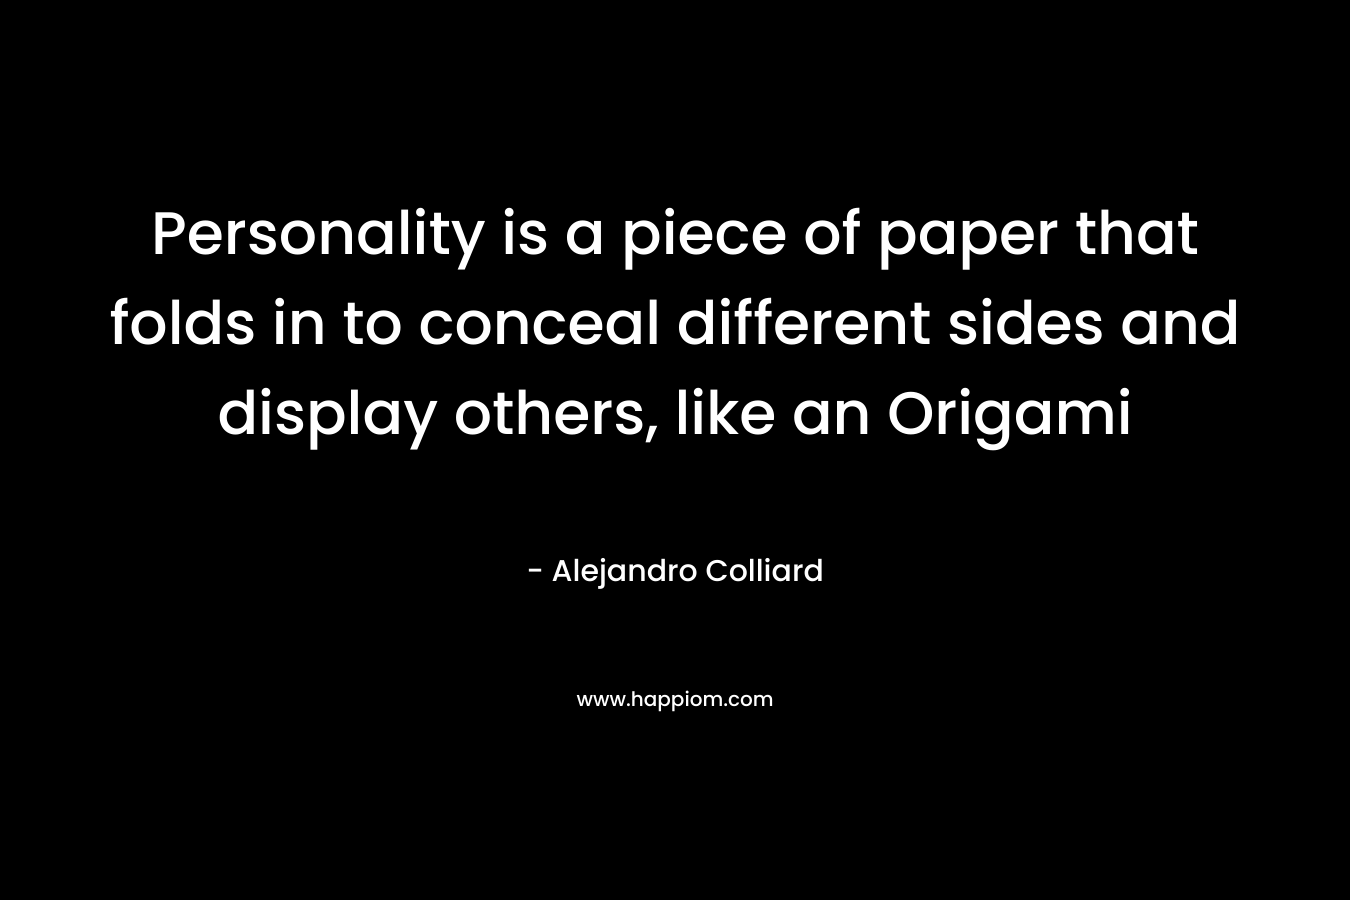 Personality is a piece of paper that folds in to conceal different sides and display others, like an Origami